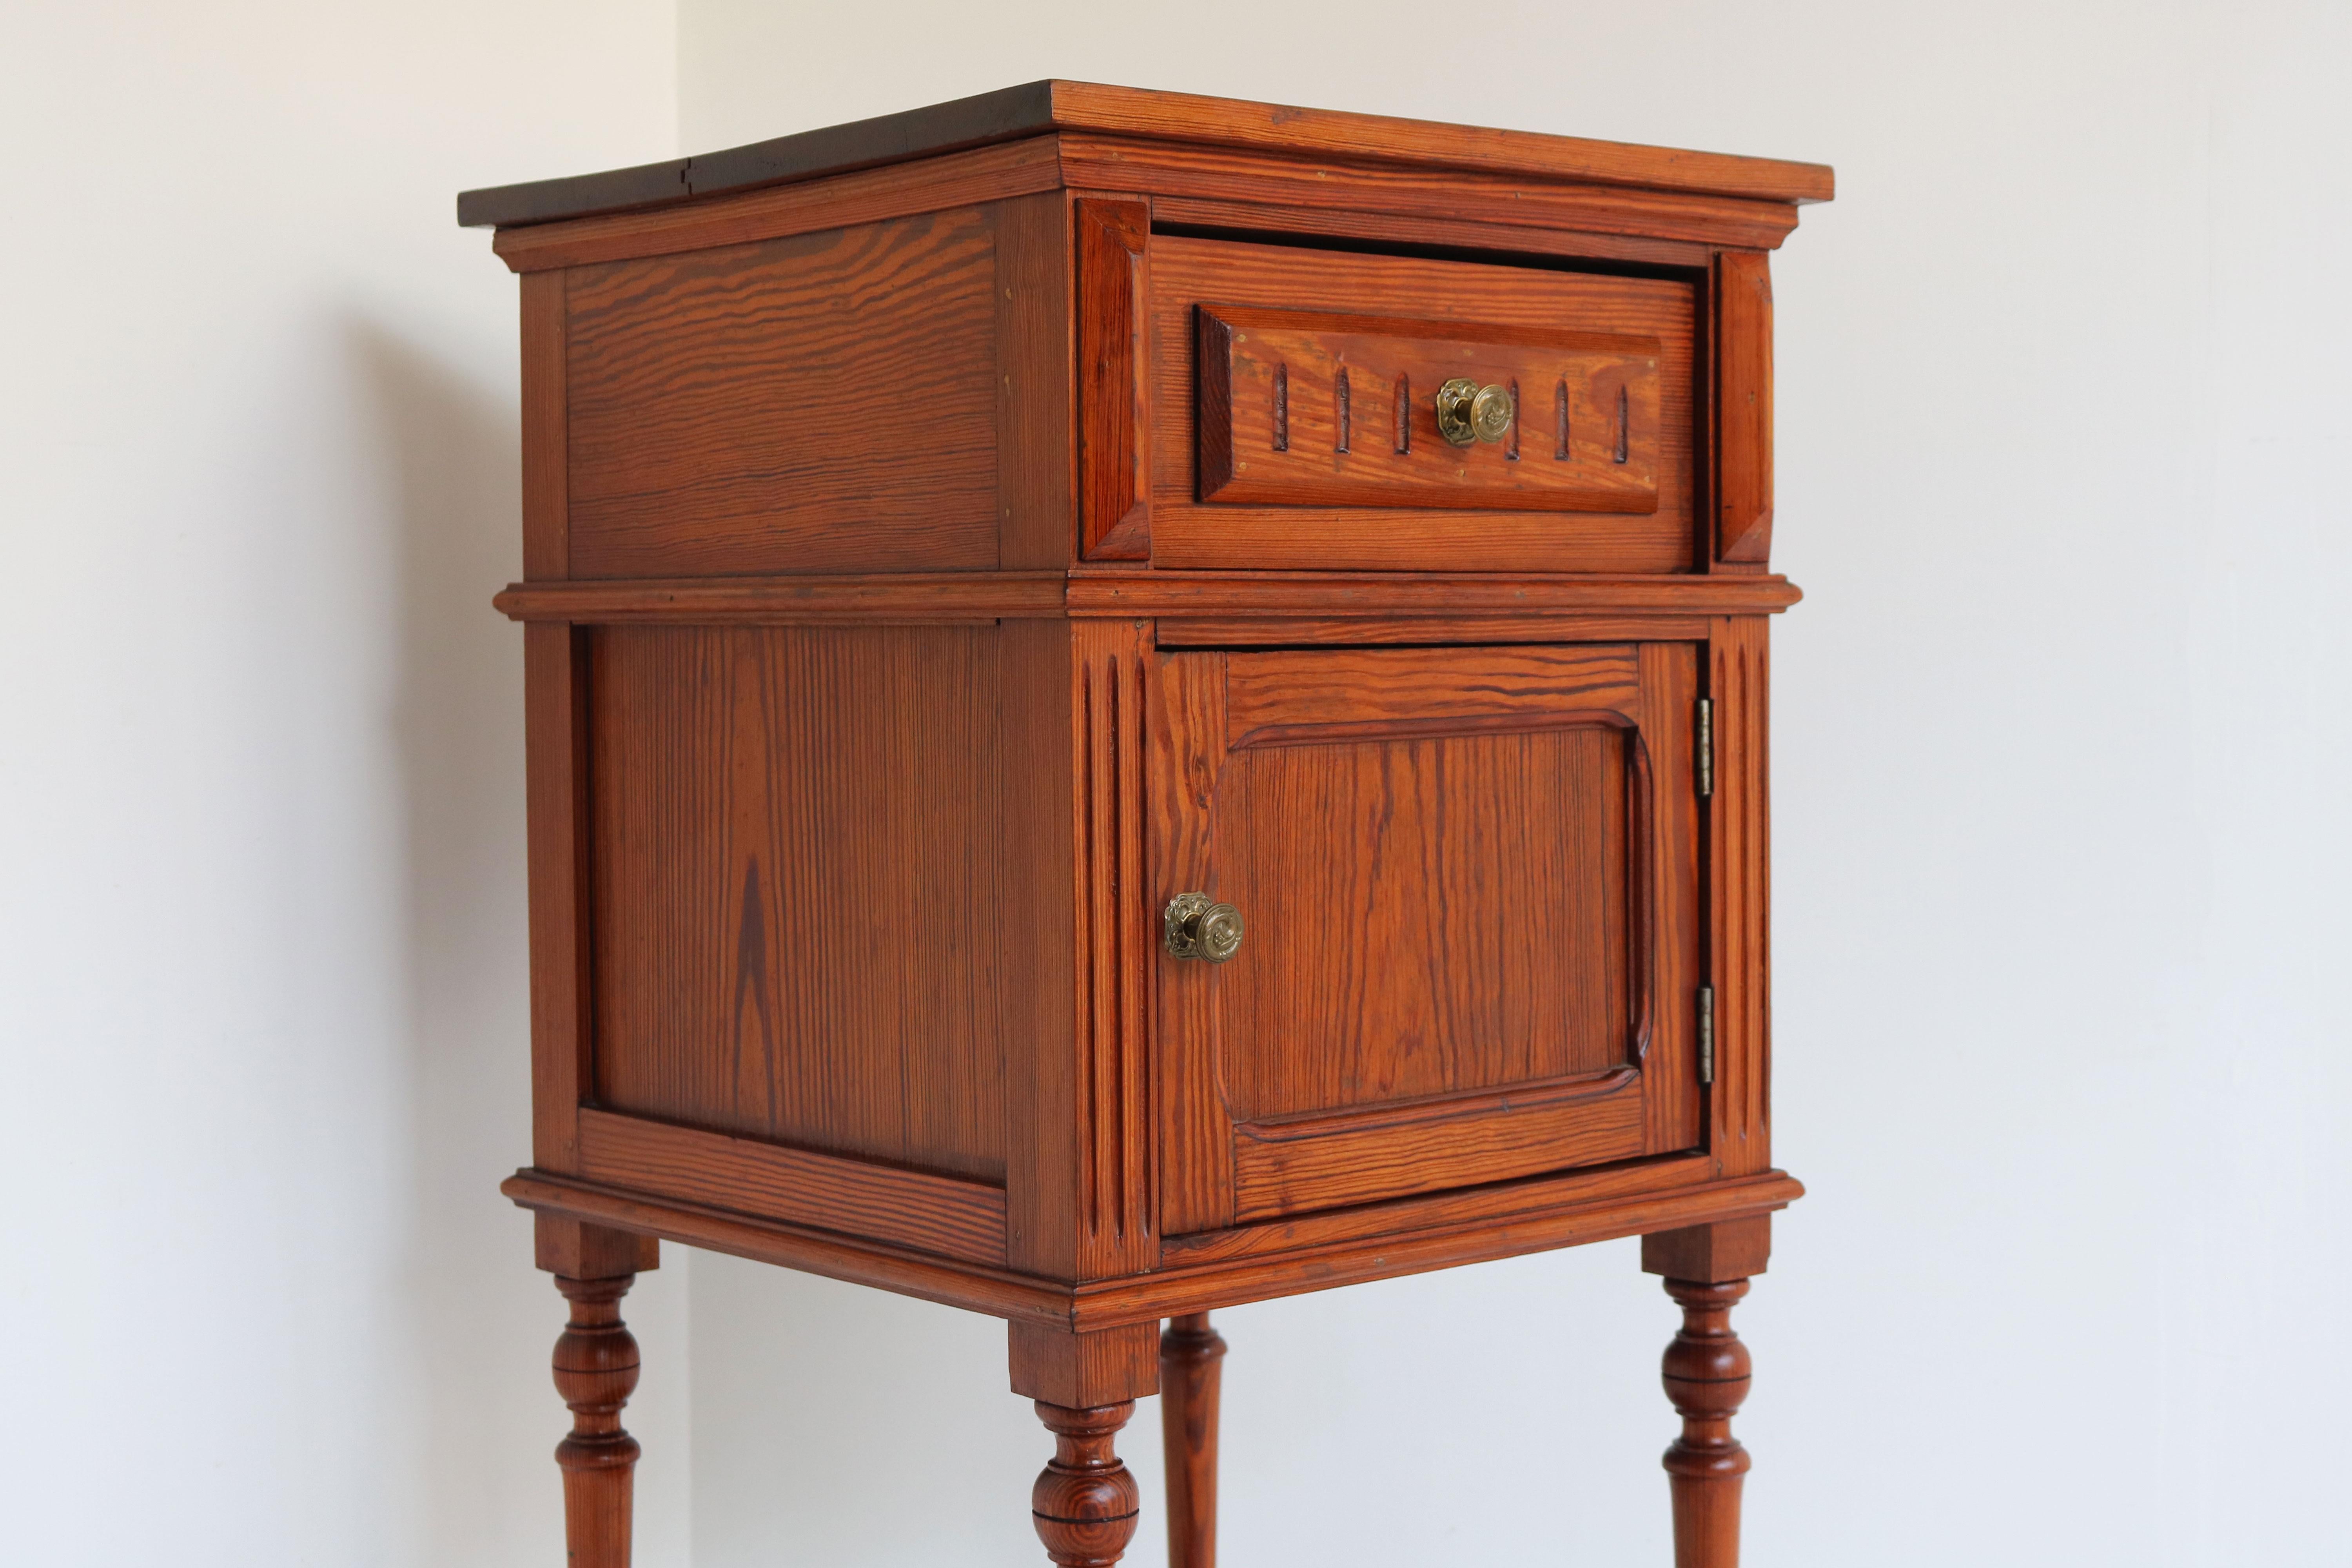 Amazing Craftsmanship & quality ! This Antique French 19th century night stand / bedside table made out of solid Pitchpine.
Amazing styled piece with hand-carved decorations and long detailed legs. 
The cabinet has 1 drawer, 1 door with storage &